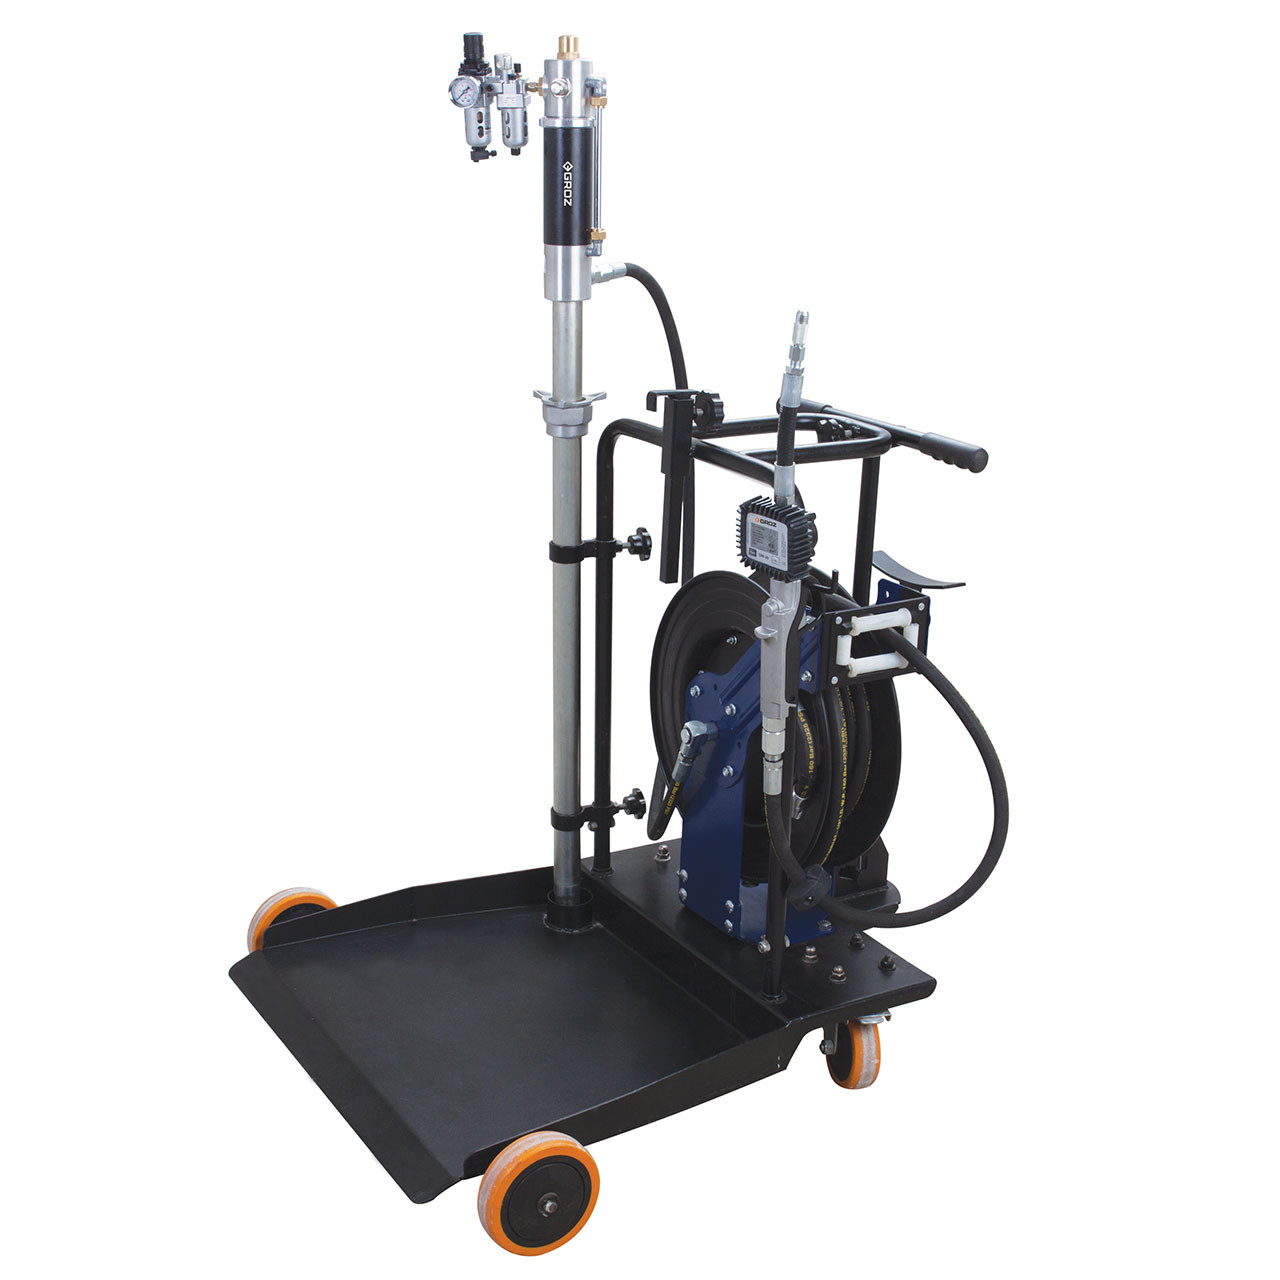 Roughneck Air-Operated 6.5:1 Oil Pump Kit With Cart and Hose Reel 4.7 GPM 